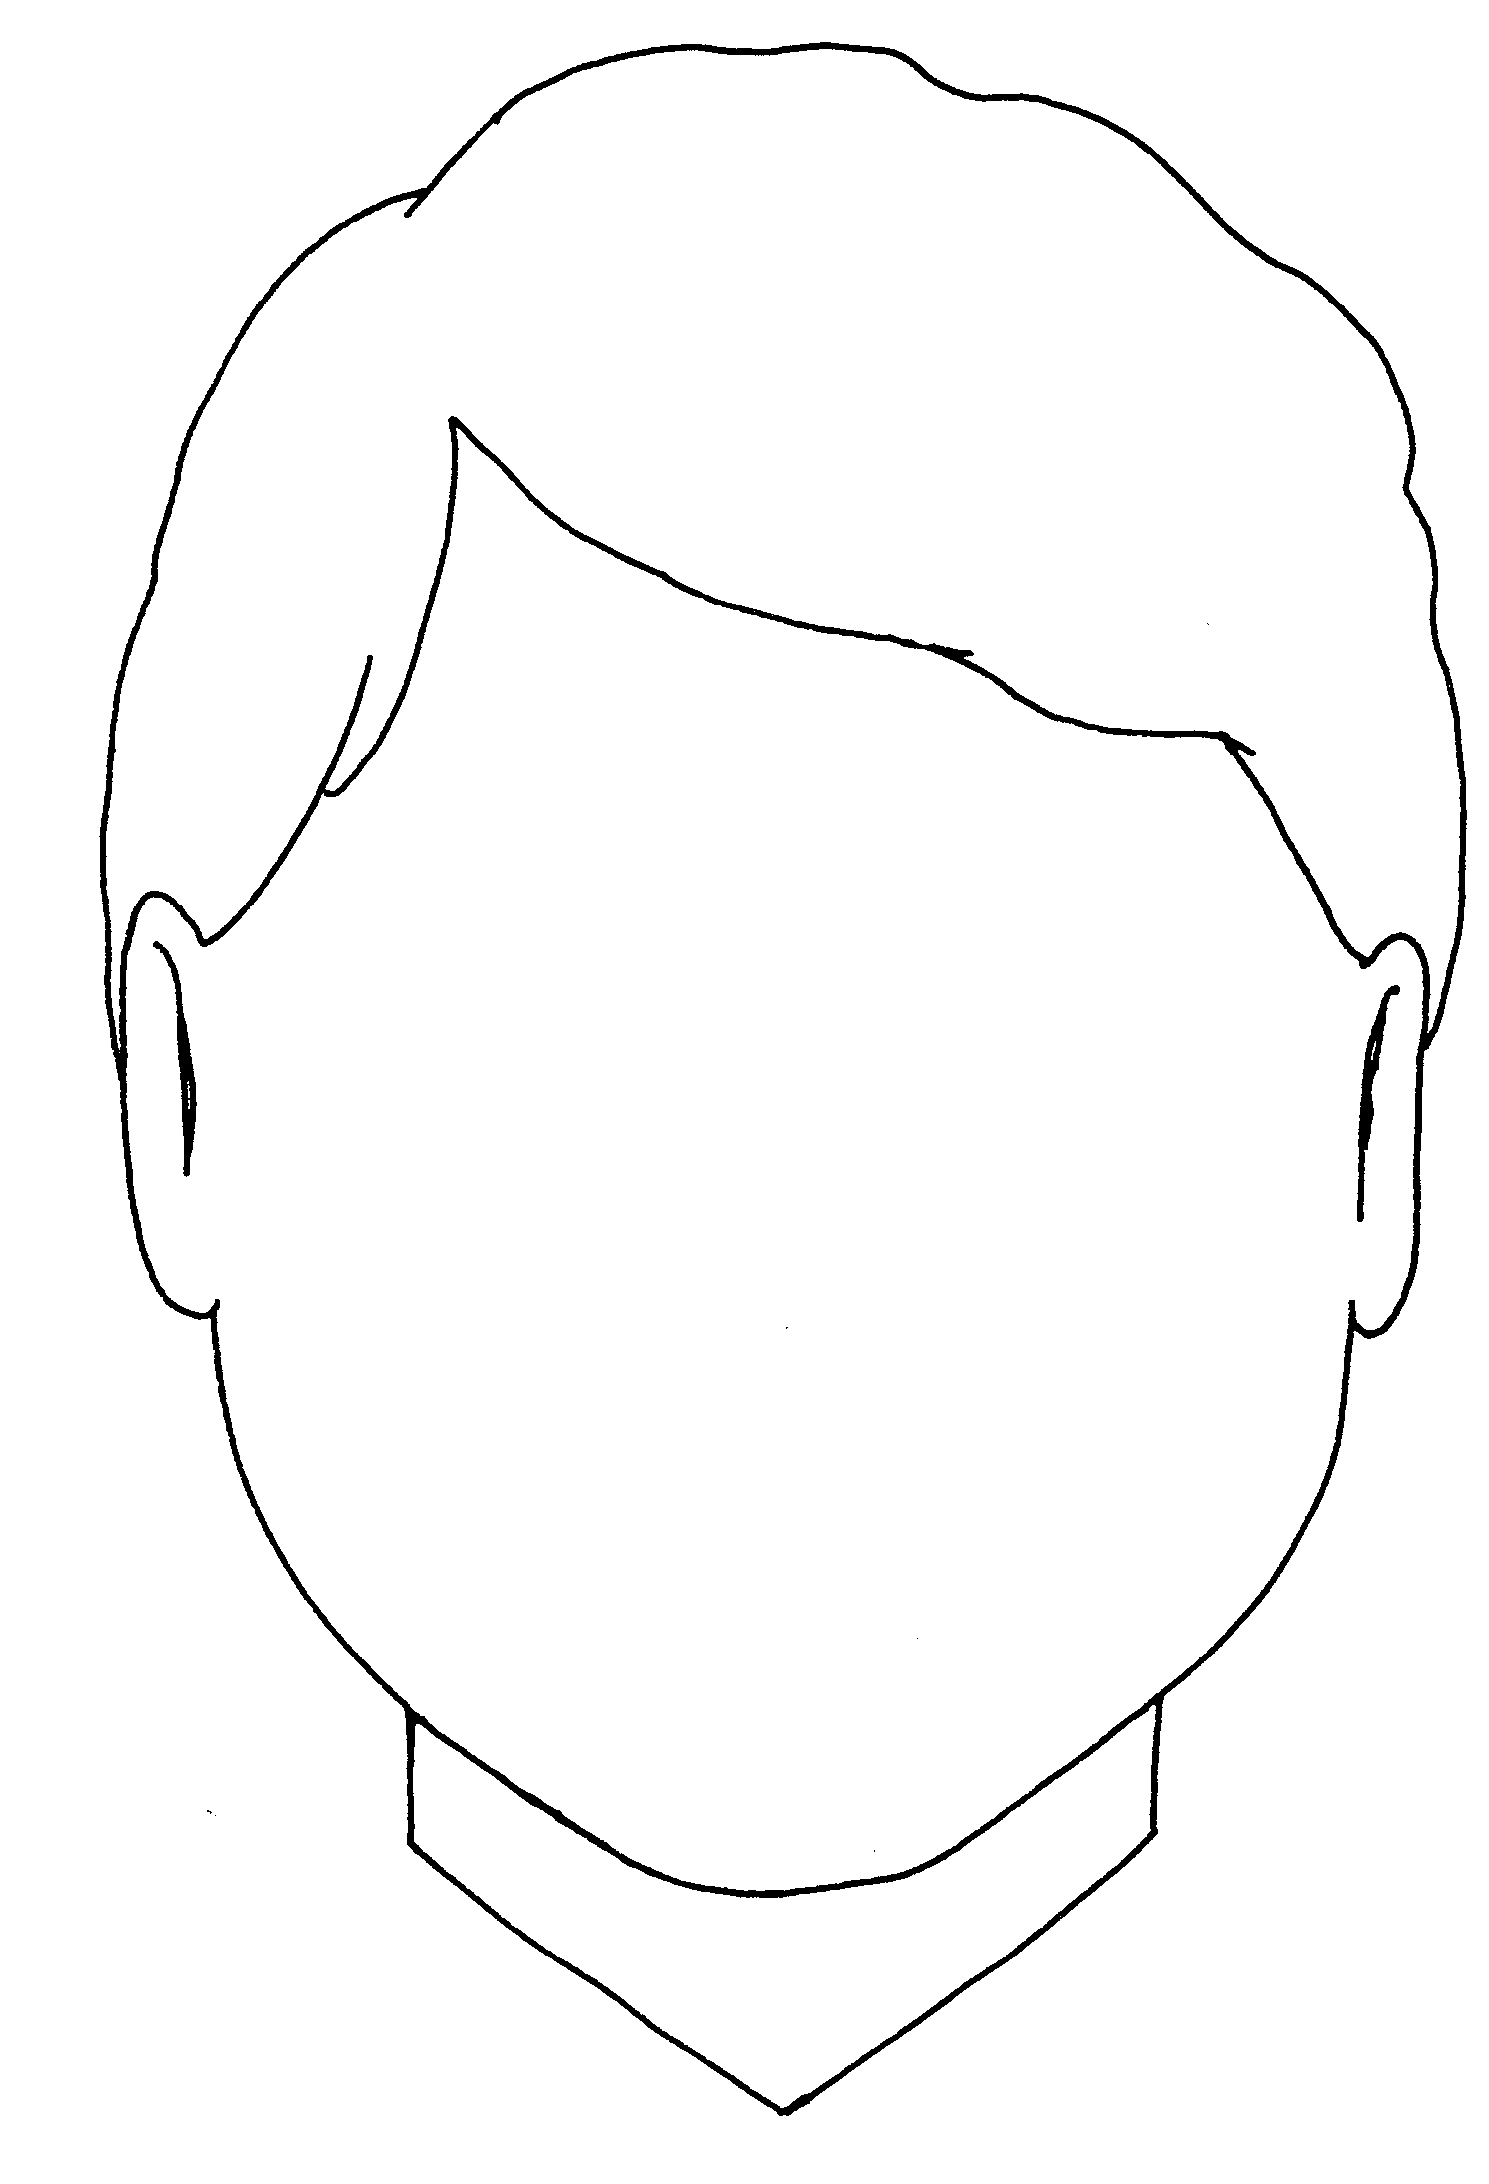 10 Boy Face Pic Outline Free Cliparts That You Can Download To You